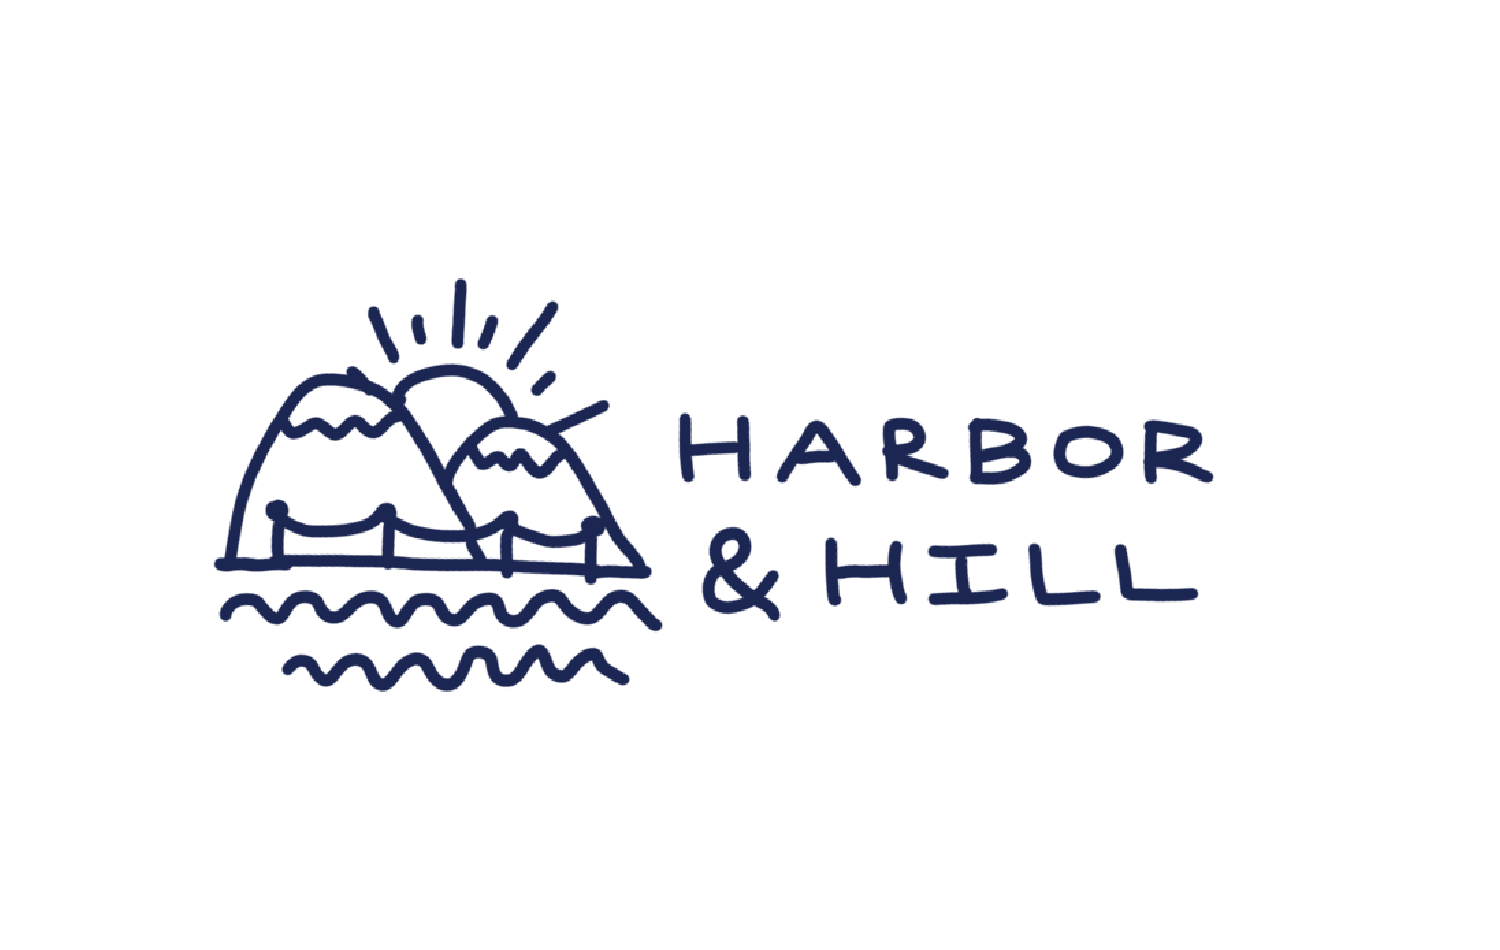 Harbor & Hill sketches